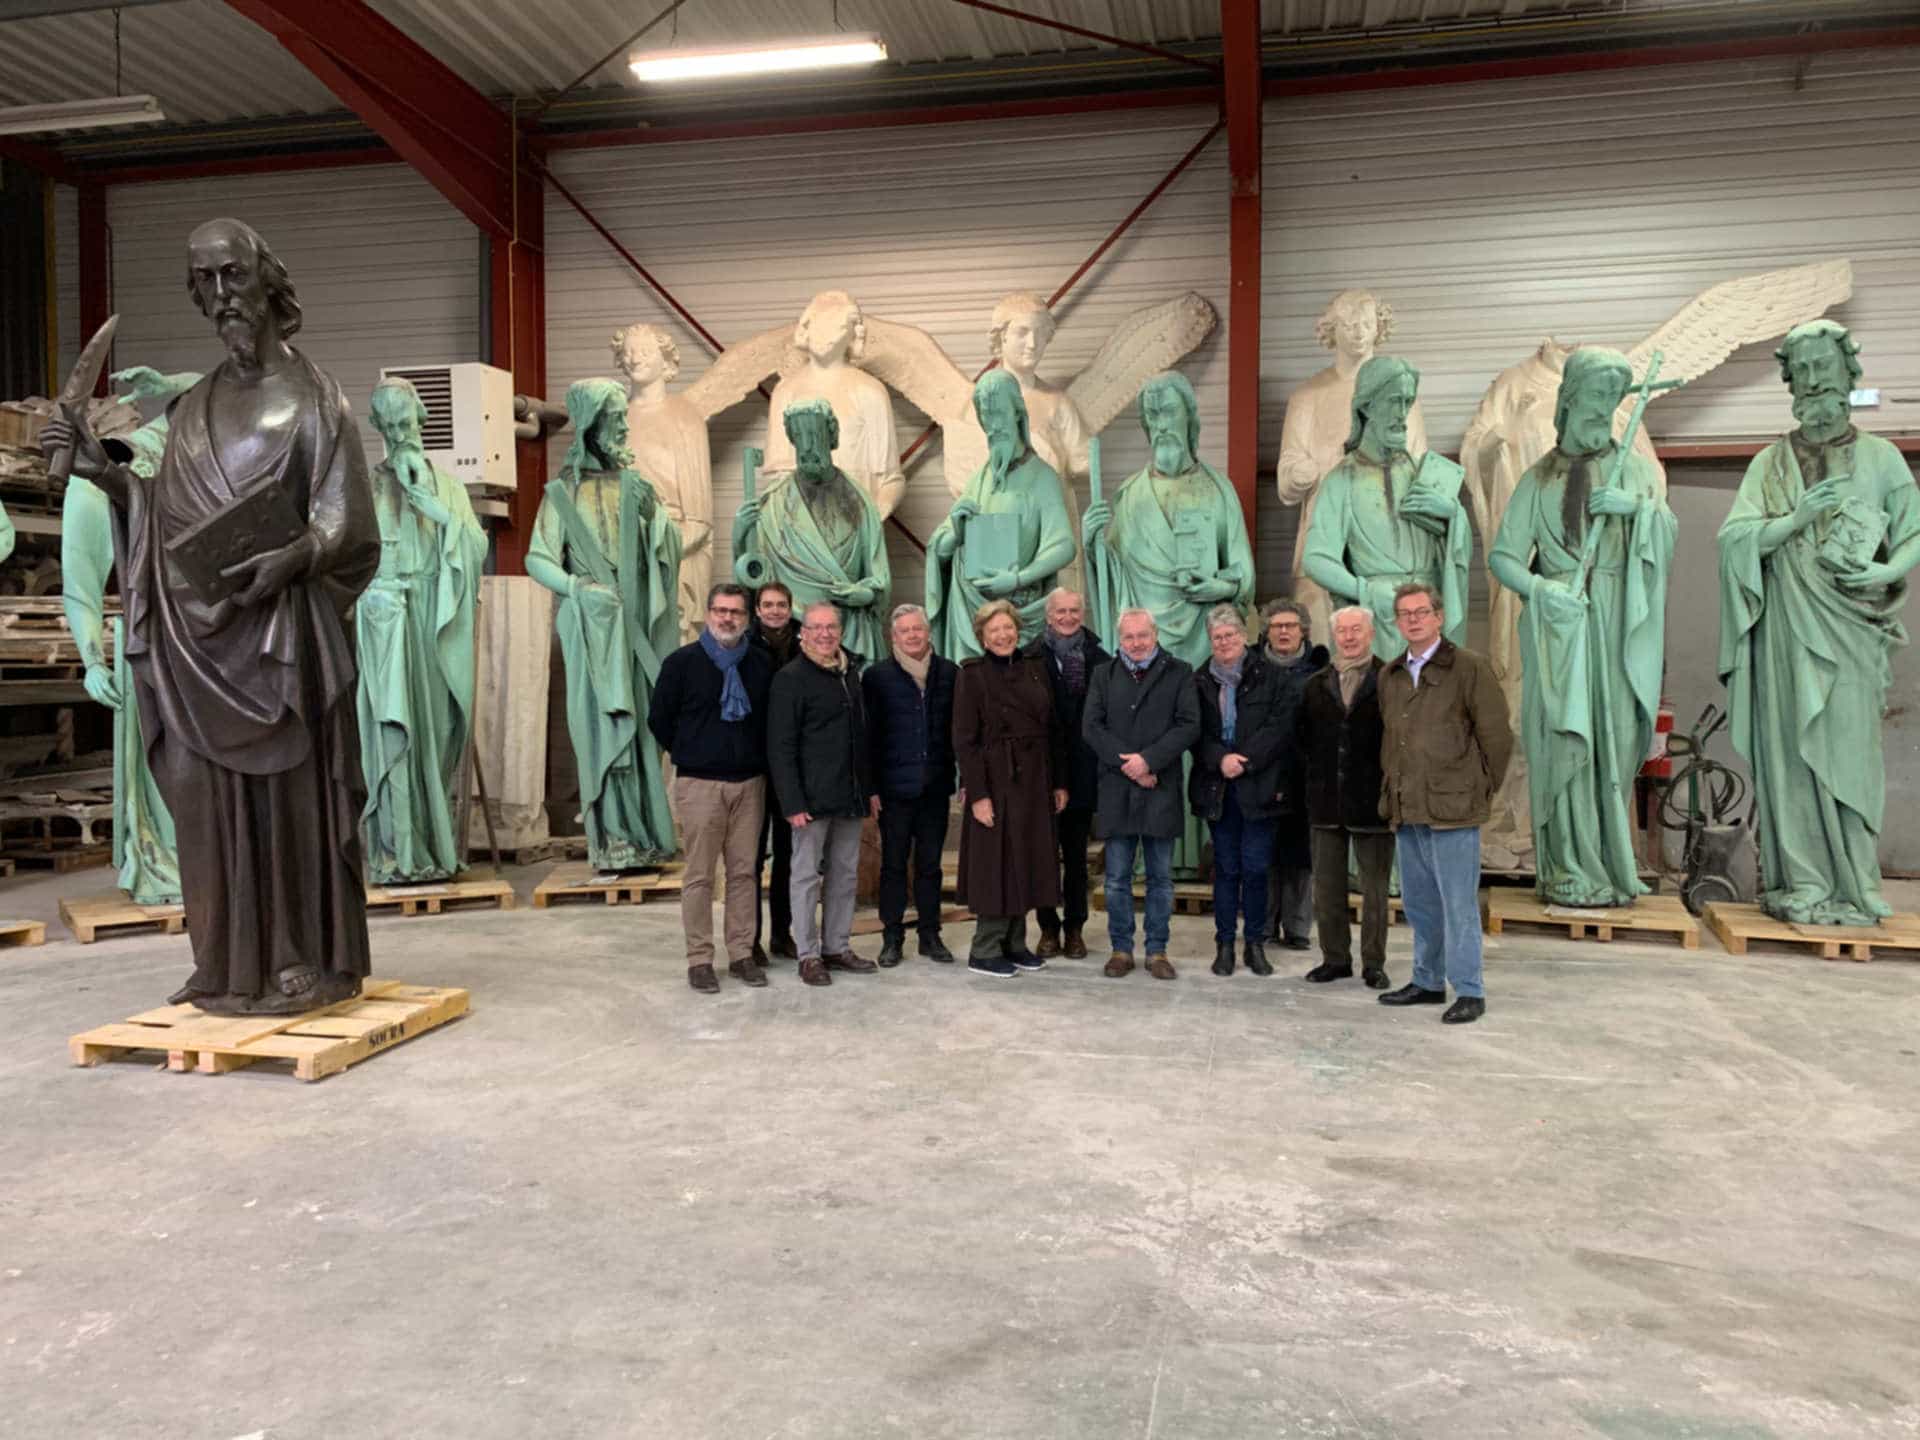 This picture shows the Friends of Notre-Dame de Paris team on a restoration site, before the fire. The picture depicts the statues of the Apostles in the background. This photo illustrates the section entitled: